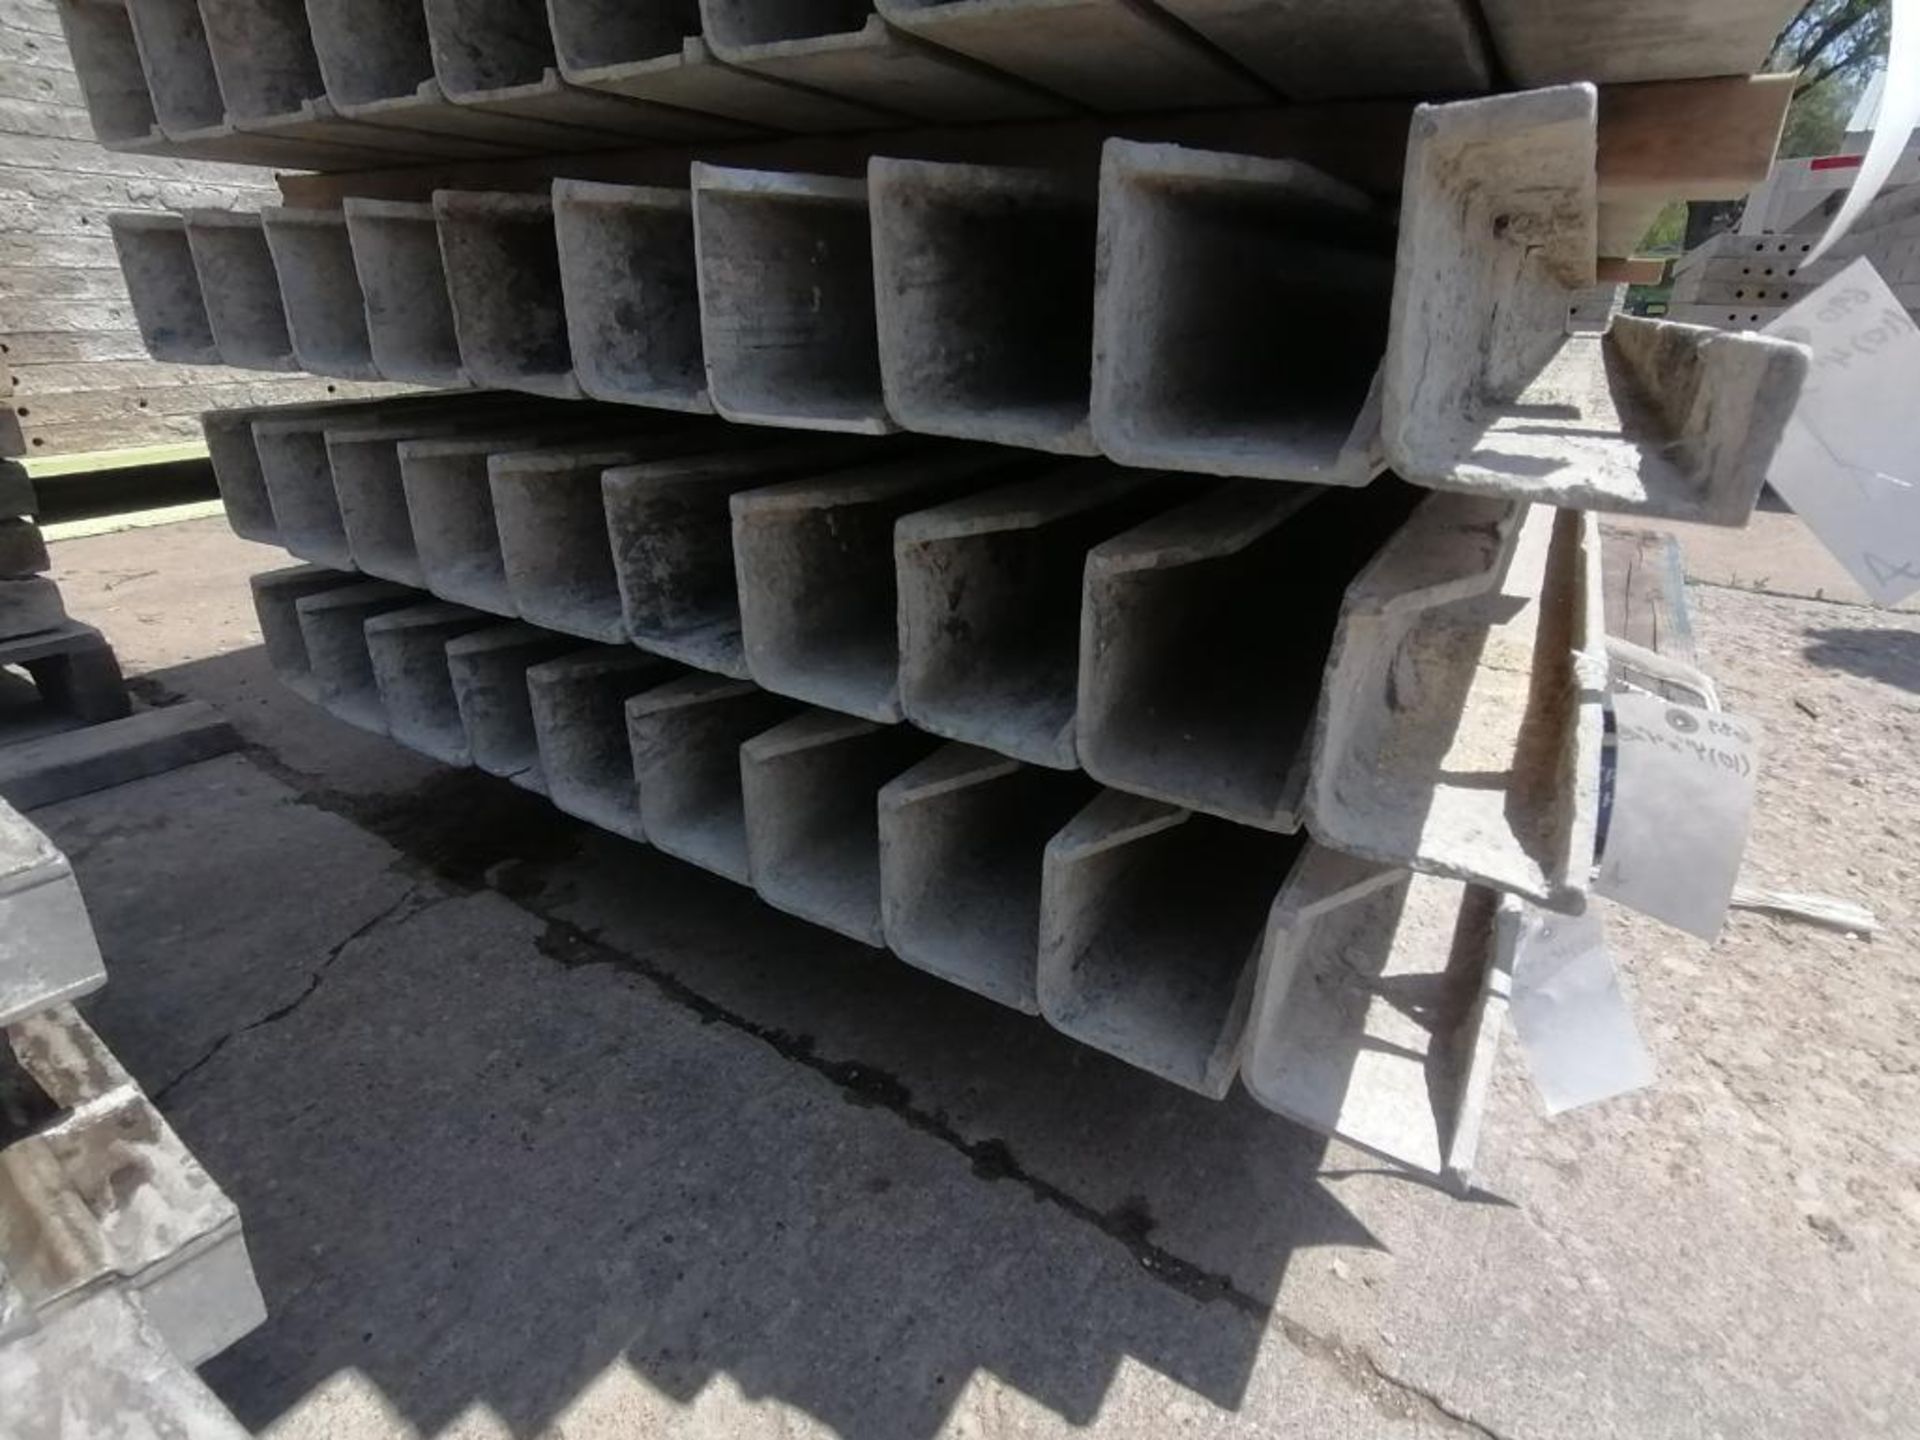 (10) 4" x 4" x 8' Full ISC Wall-Ties Smooth Aluminum Concrete Forms 6-12 Hole Pattern. Located in